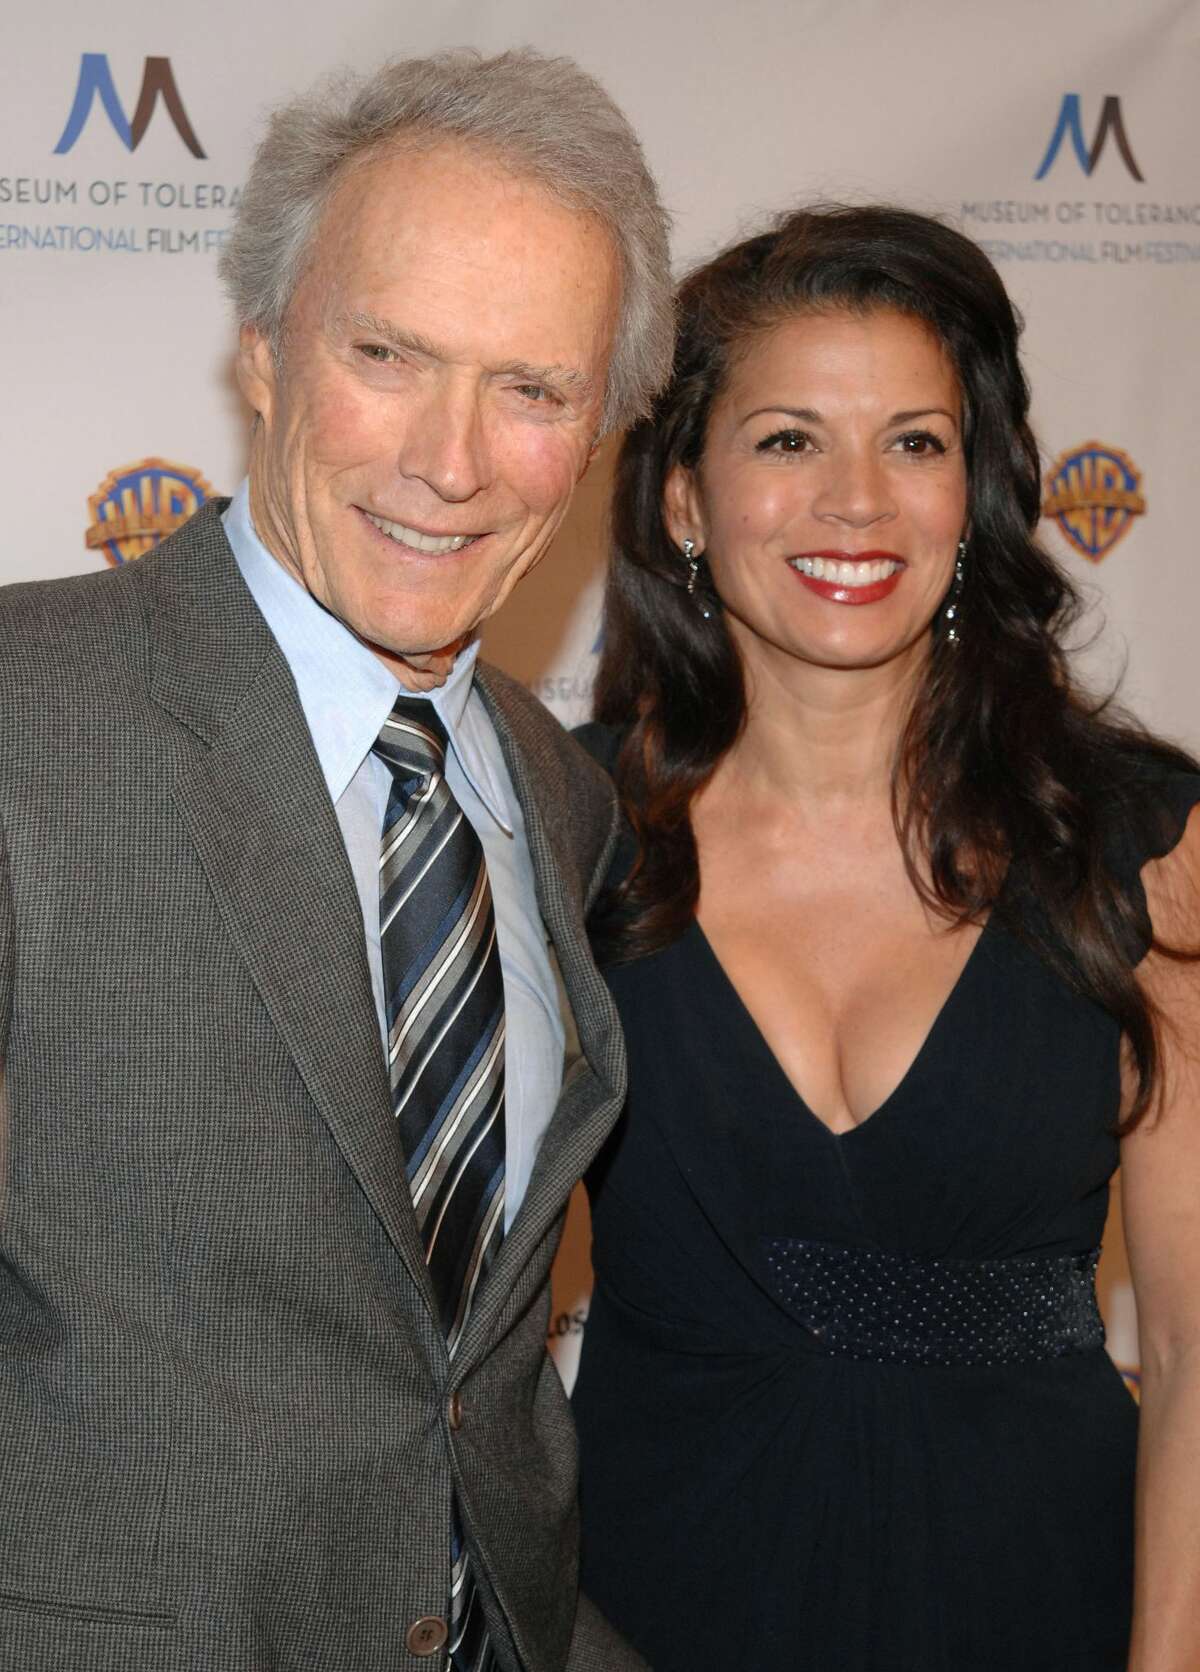 Couple: Clint Eastwood and Dina Ruiz Relationship: Married (1996-2014) Reality Show: "Mrs. Eastwood & Company"